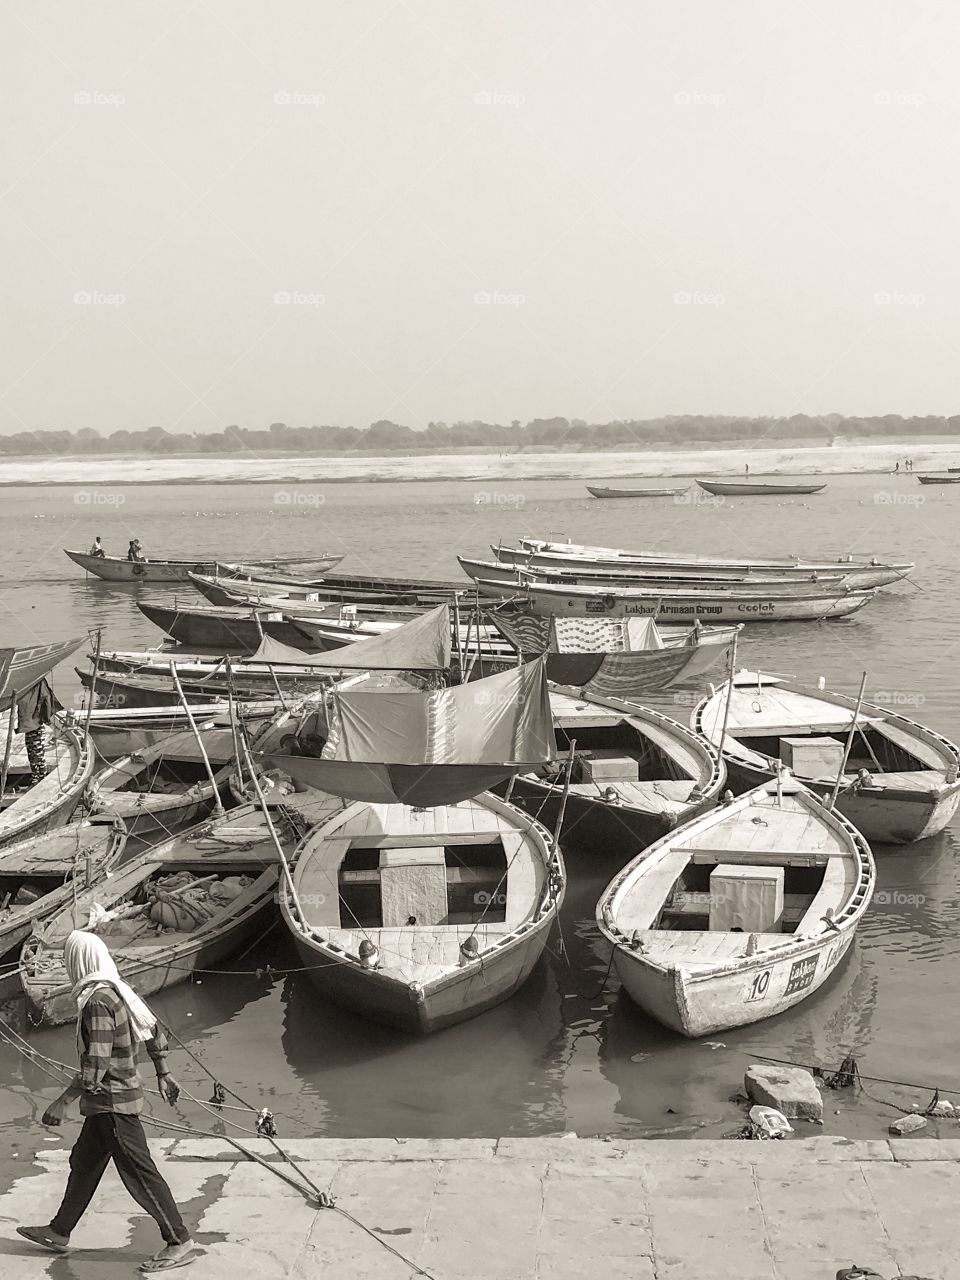 Boats waiting for customers for rides on the river Ganges 